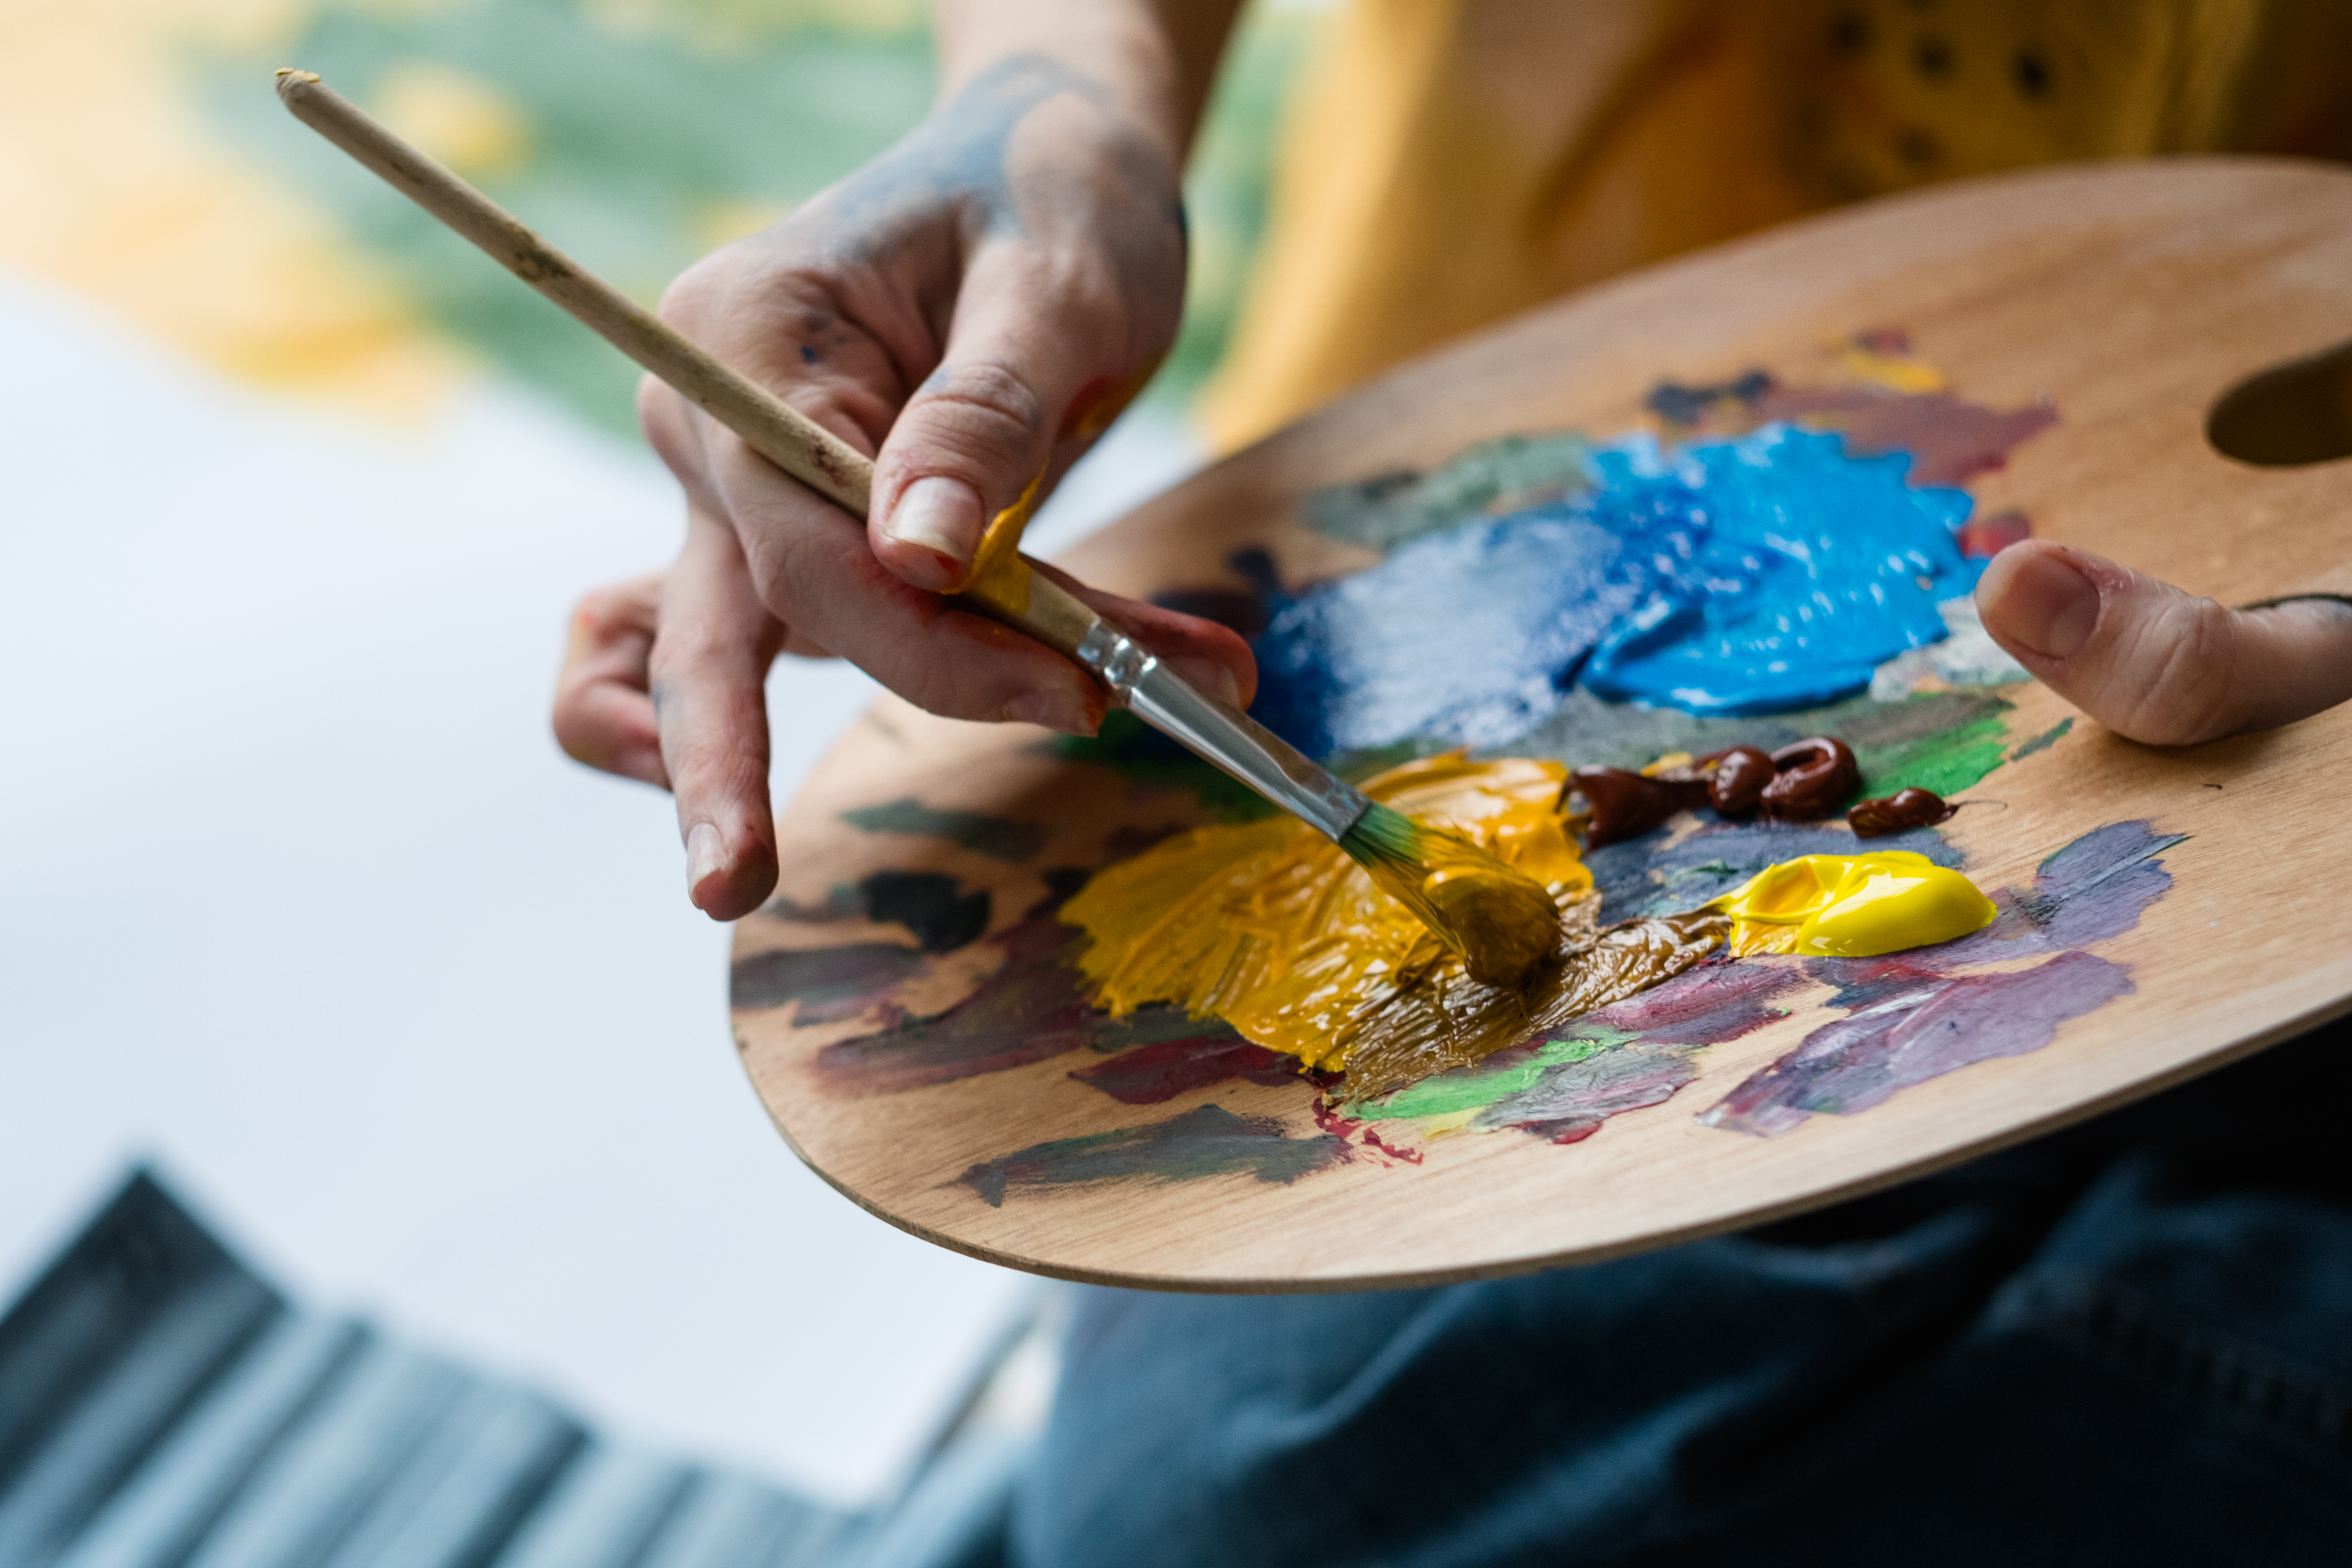 A palette with paint | Source: Getty Images